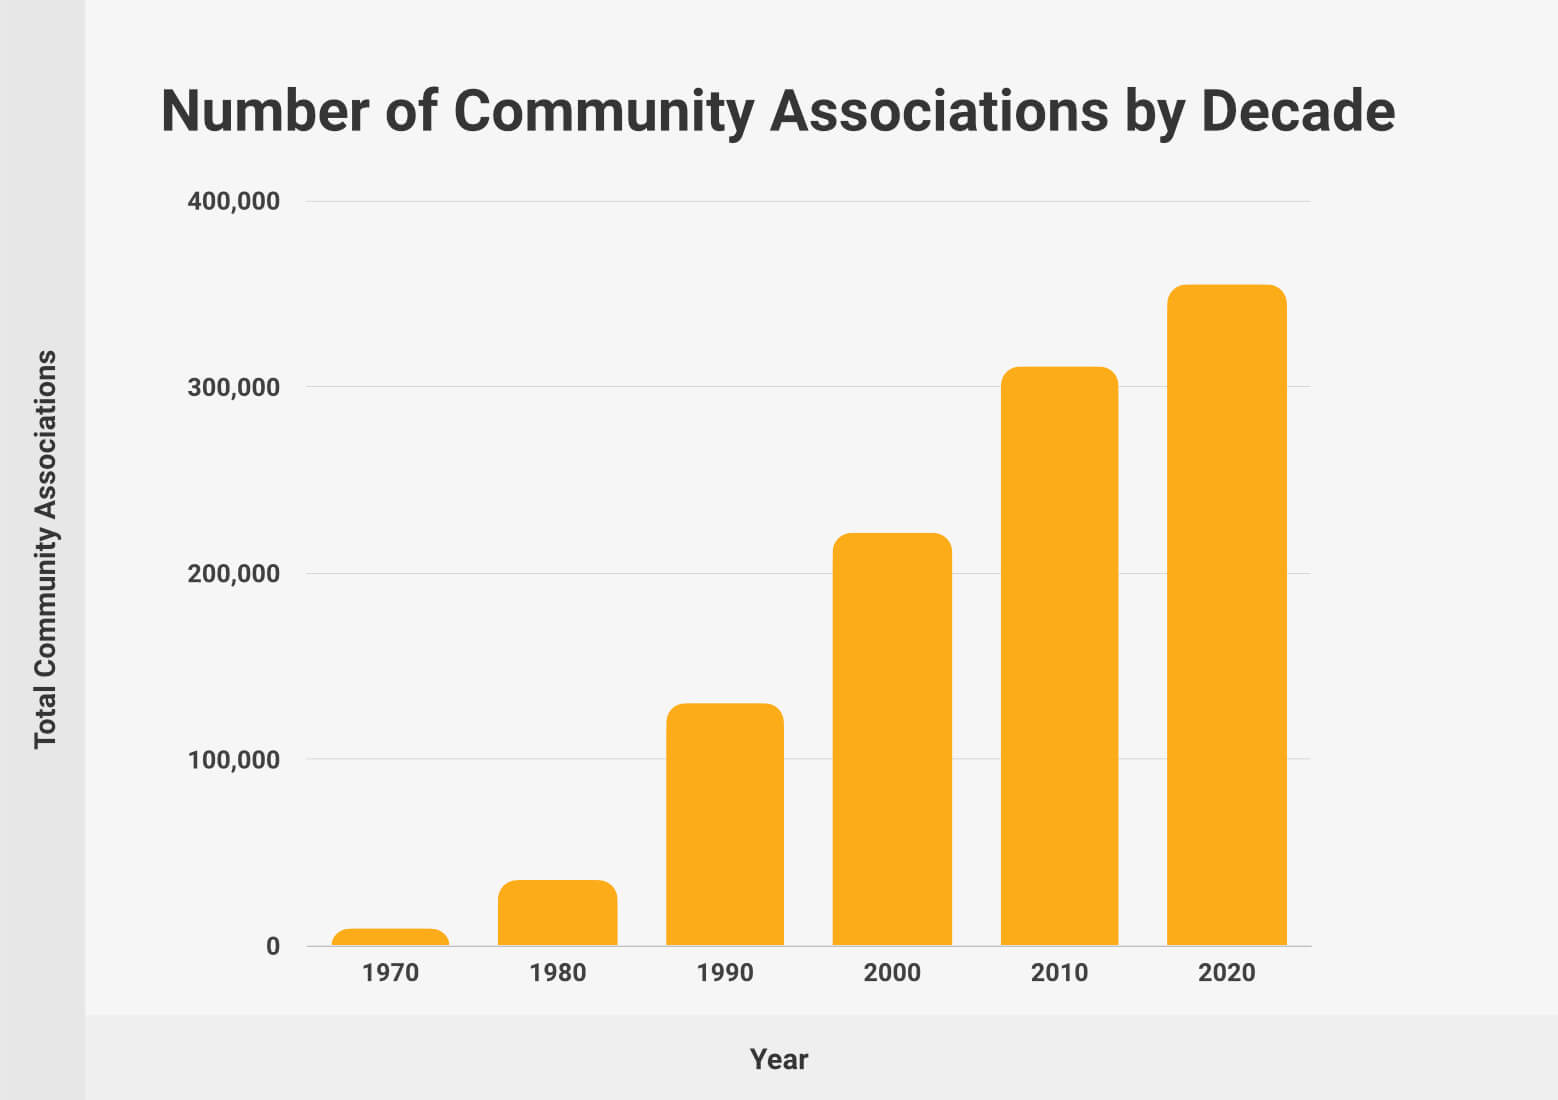 Number of Community Associations in U.S.